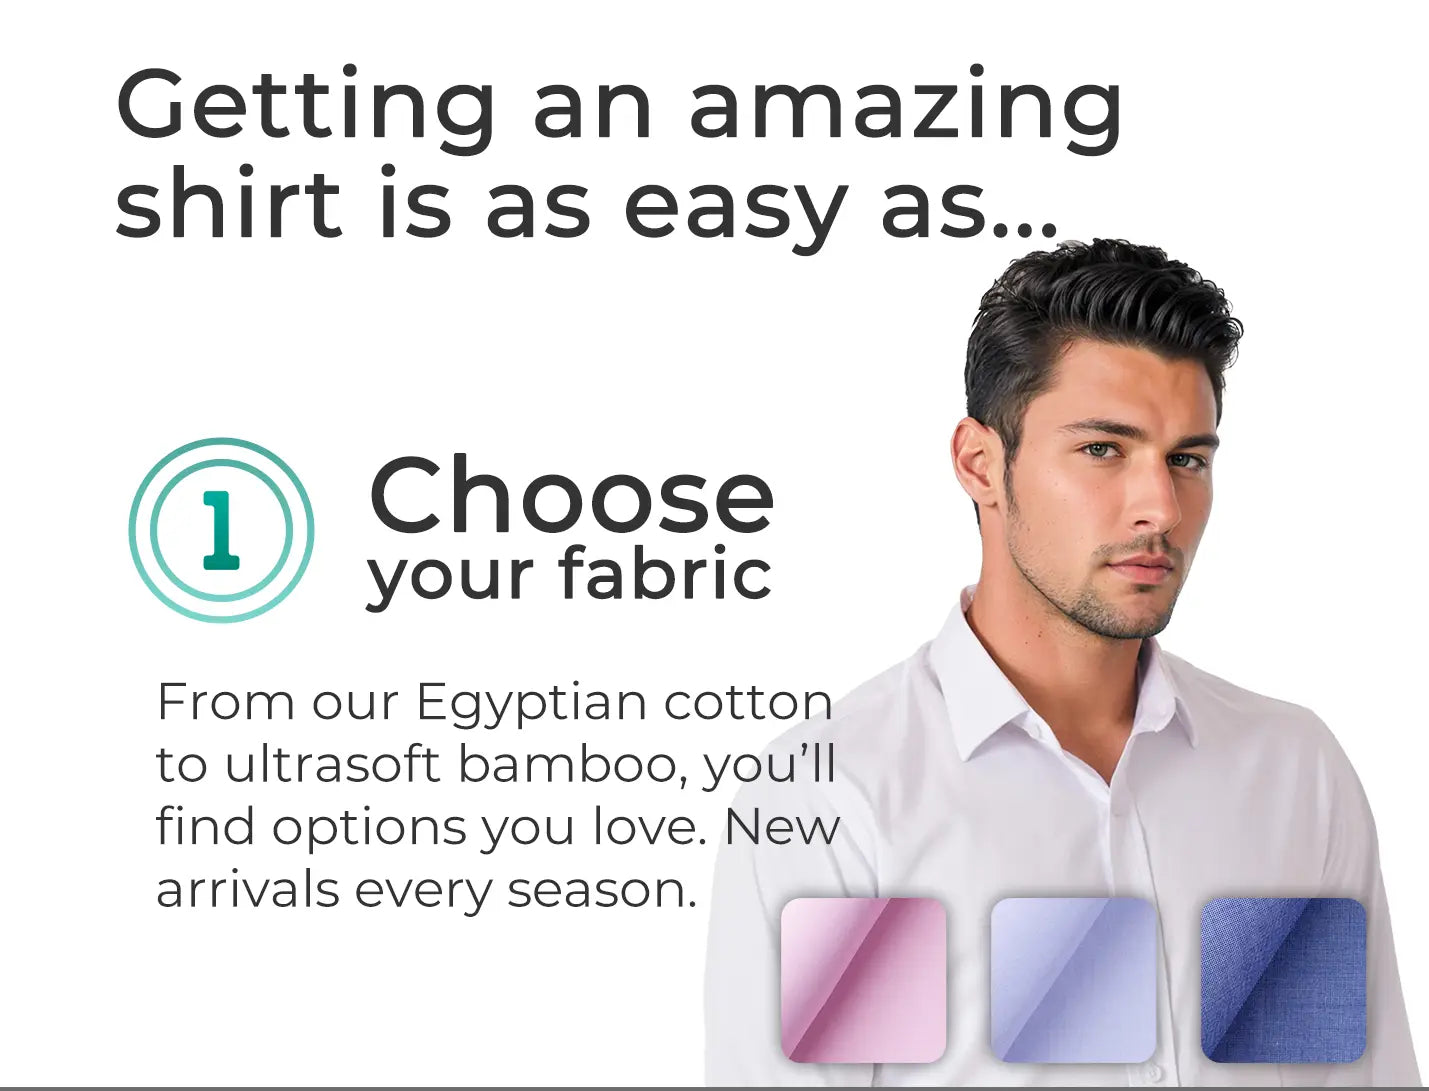 Getting an amazing shirt is as easy as... choose your fabric. From our Egyptian cotton to ultrasoft bamboo, you'll find options you love. New arrivals every season.